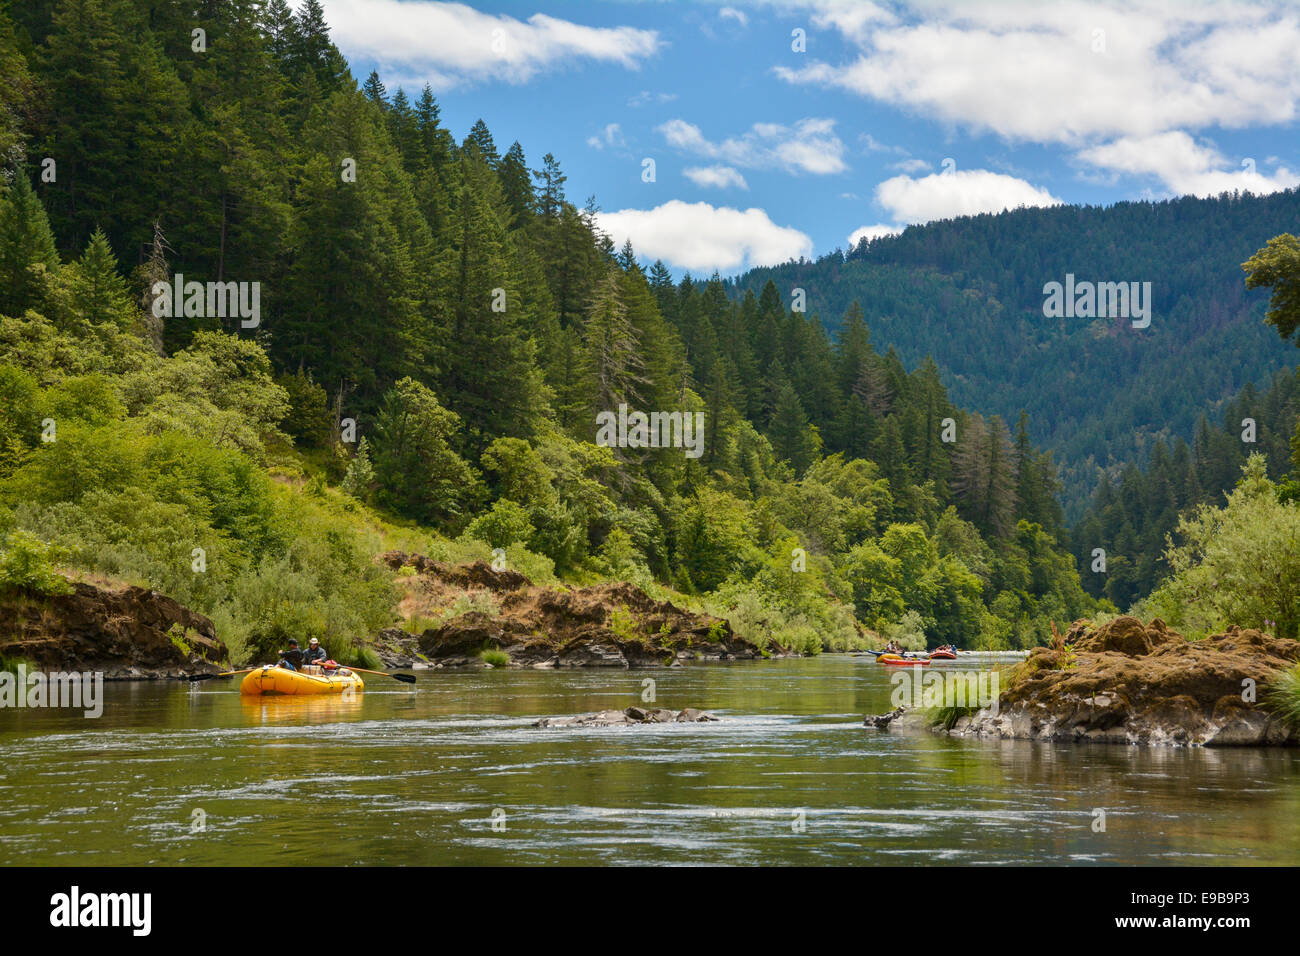 Rafting trip on the Wild and Scenic Rogue River in southern Oregon. Stock Photo